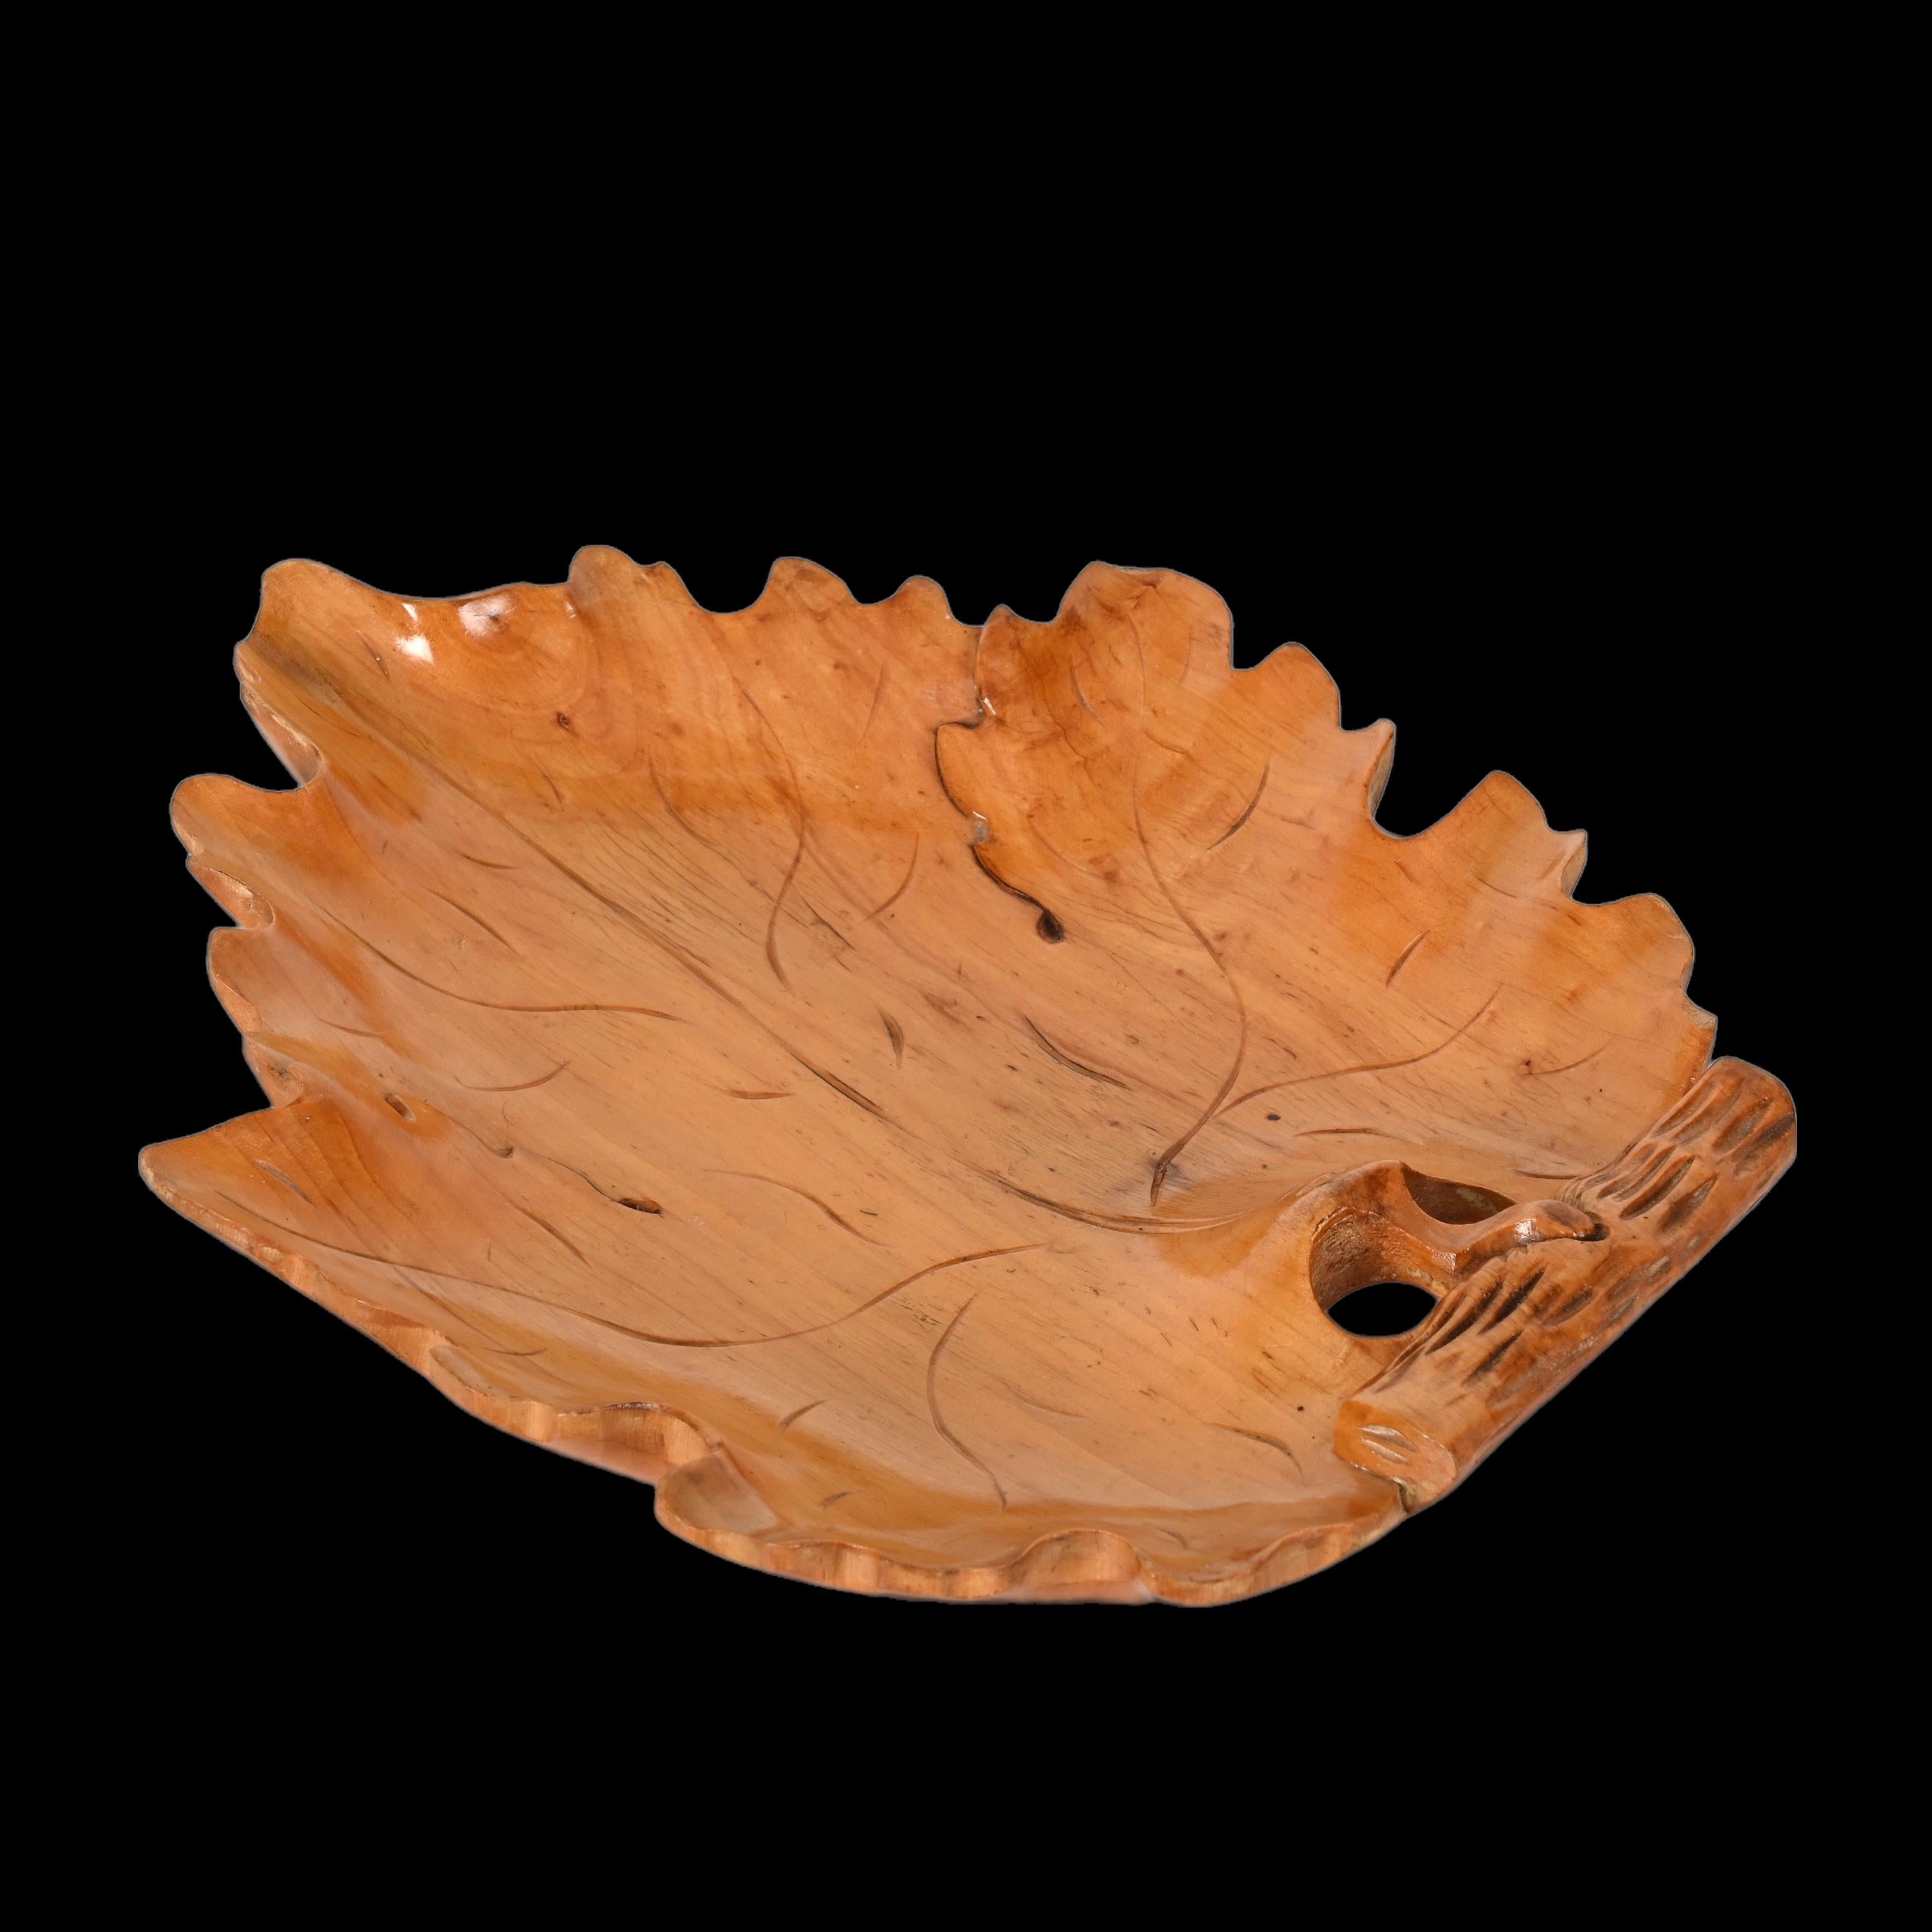 Wonderful midcentury handmade birchwood maple leaf-shaped centrepiece. Aldo Tura probably designed this piece during 1950s for Macabo.

This piece is special as it has a curved maple tree leaf shape with astonishing details, like veins. The wood